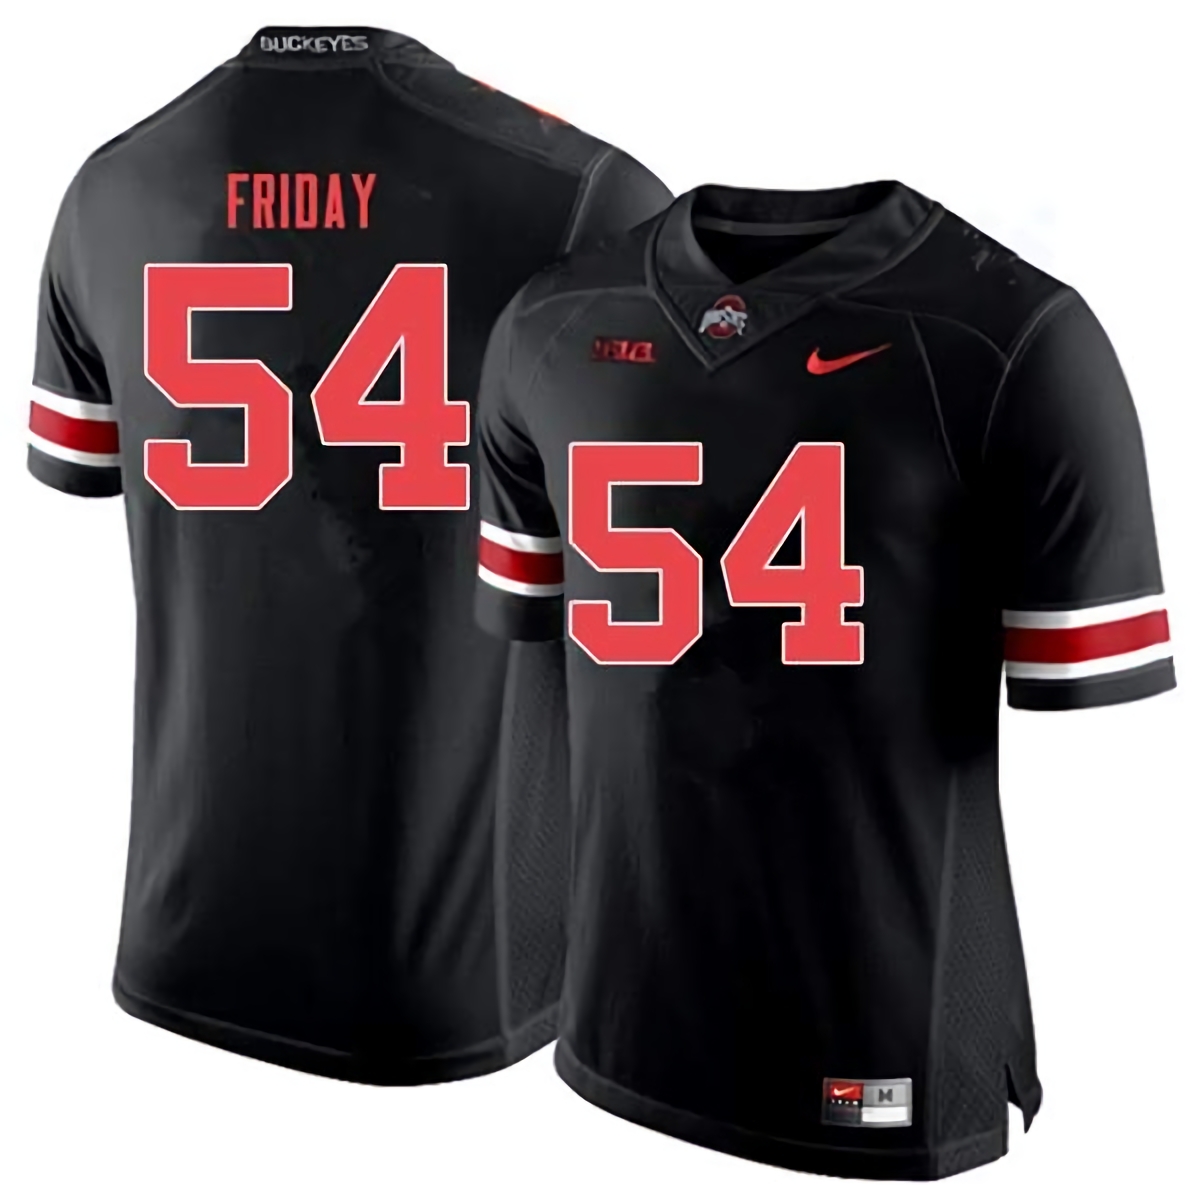 Tyler Friday Ohio State Buckeyes Men's NCAA #54 Nike Black Out College Stitched Football Jersey DMH0556OM